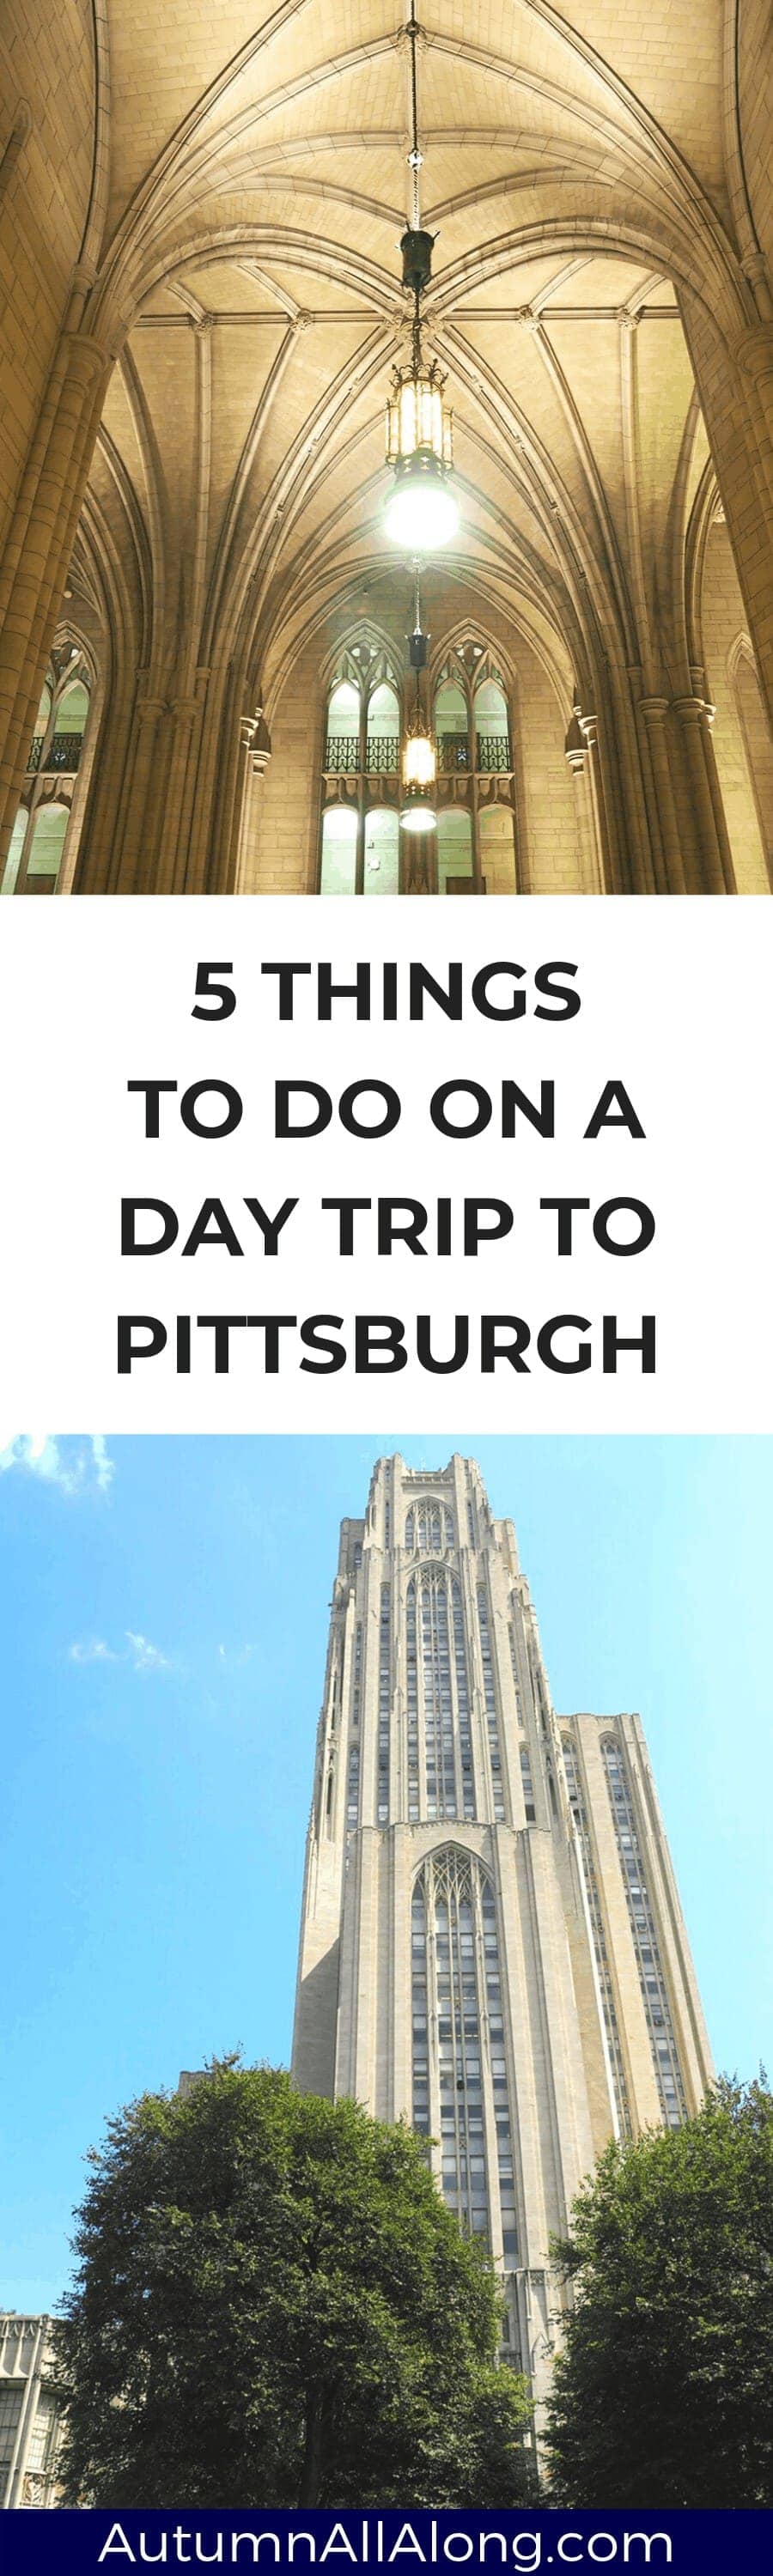 These are five places we visited in Pittsburgh, Pennsylvania for an affordable family day trip.| via Autumn All Along